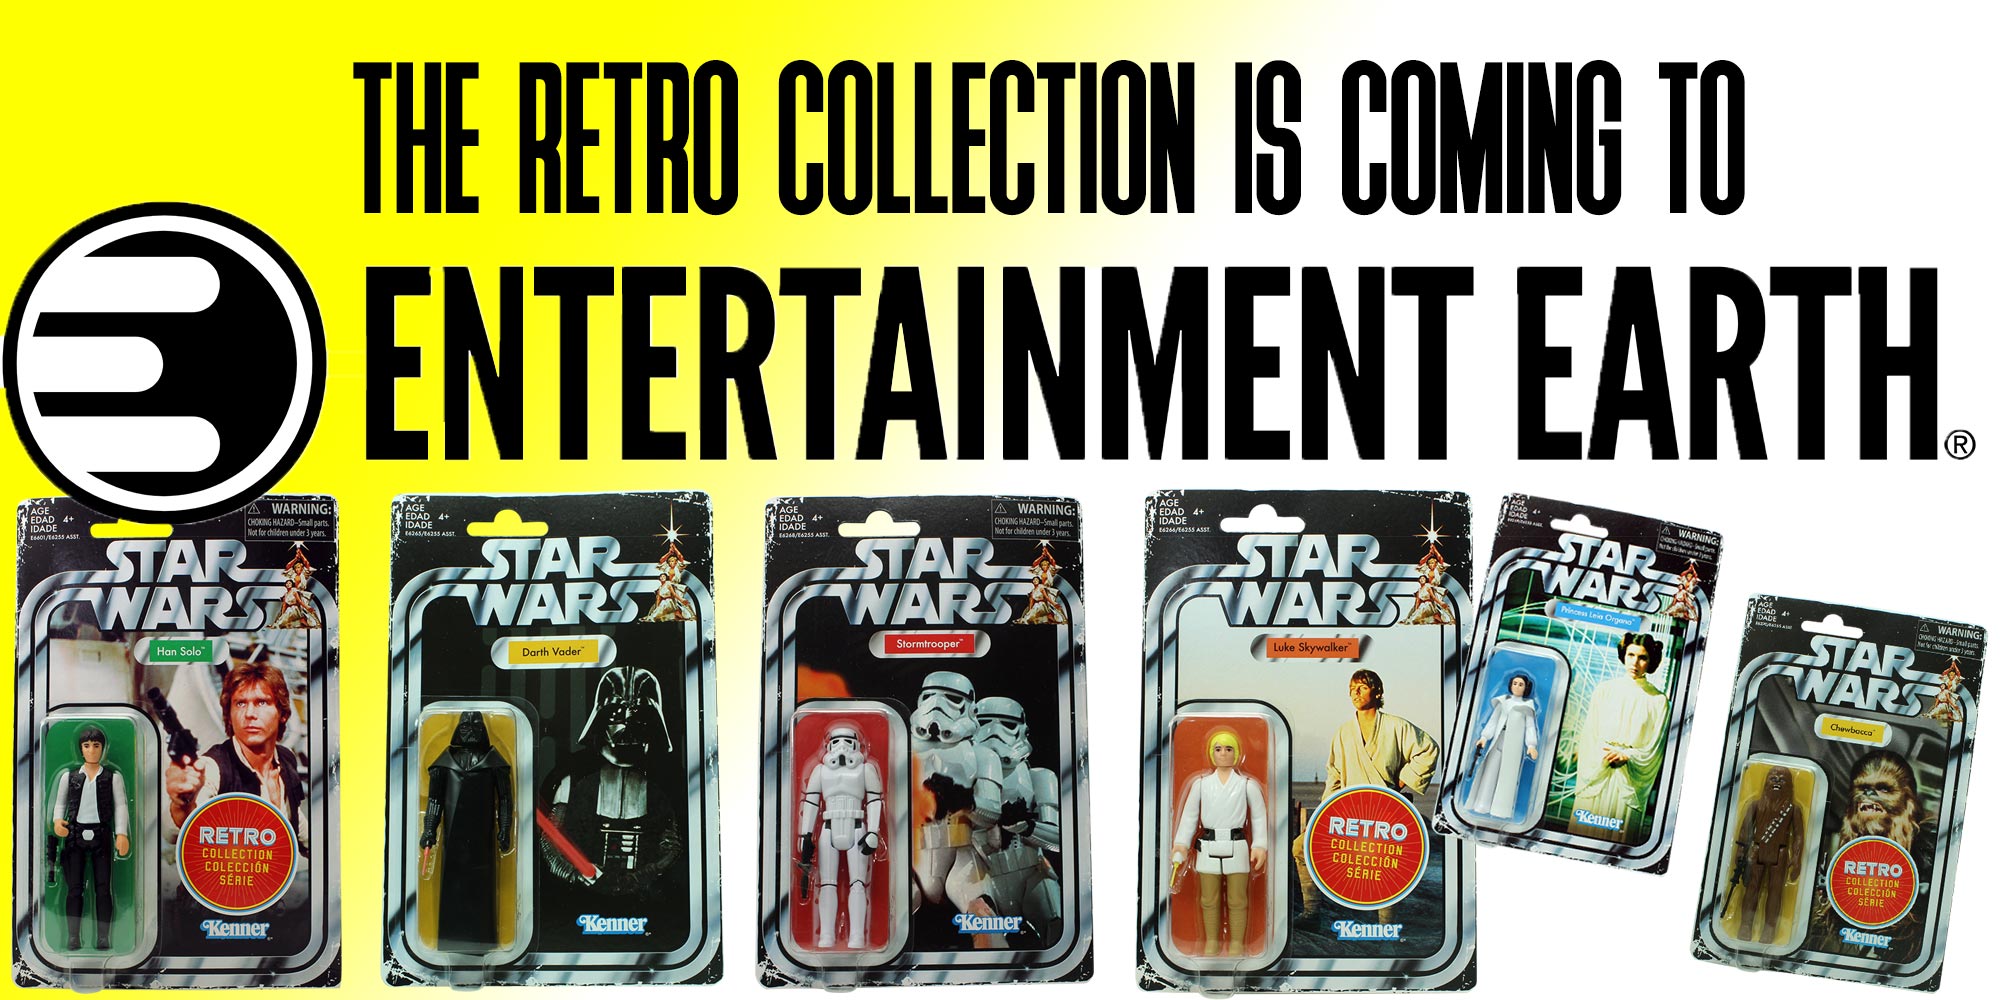 The Retro Collection Is Coming To Entertainment Earth!